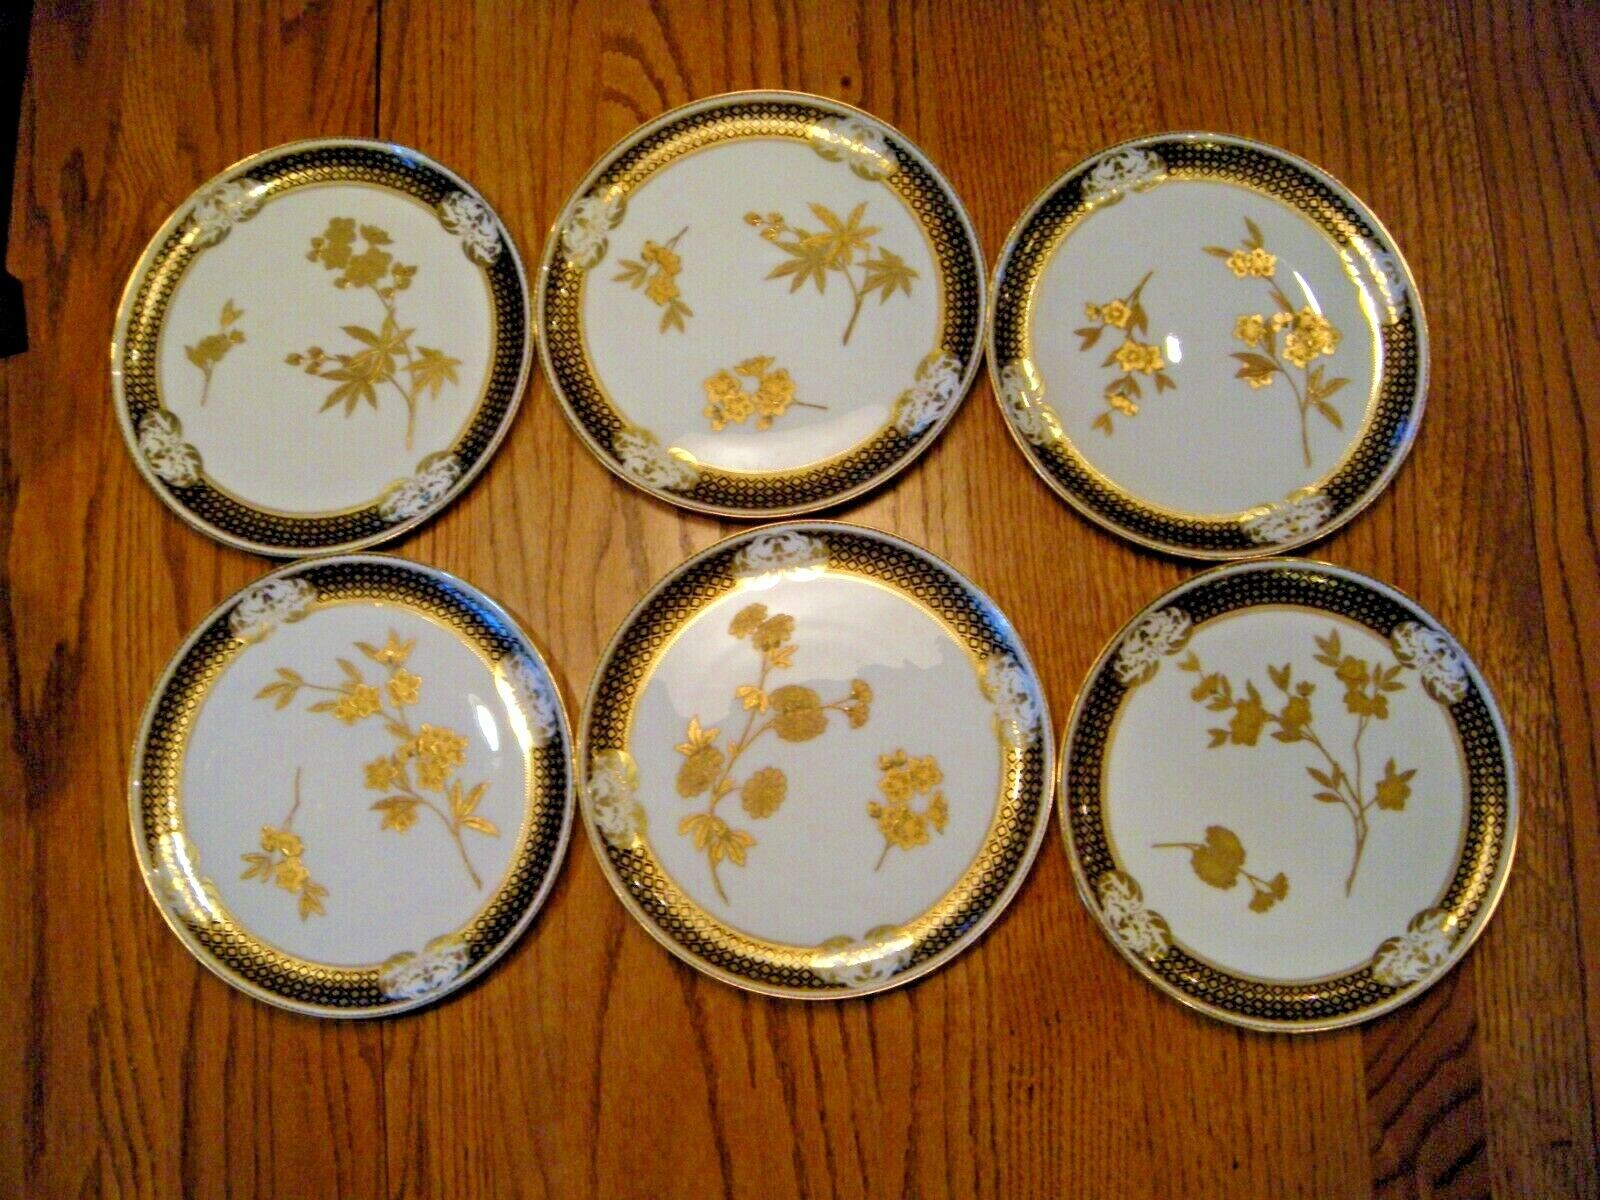 Set of Six BROWNFIELD's for TIFFANY's Gold & Cobalt Fine China Plates ca. 1884  Tiffany & Co.